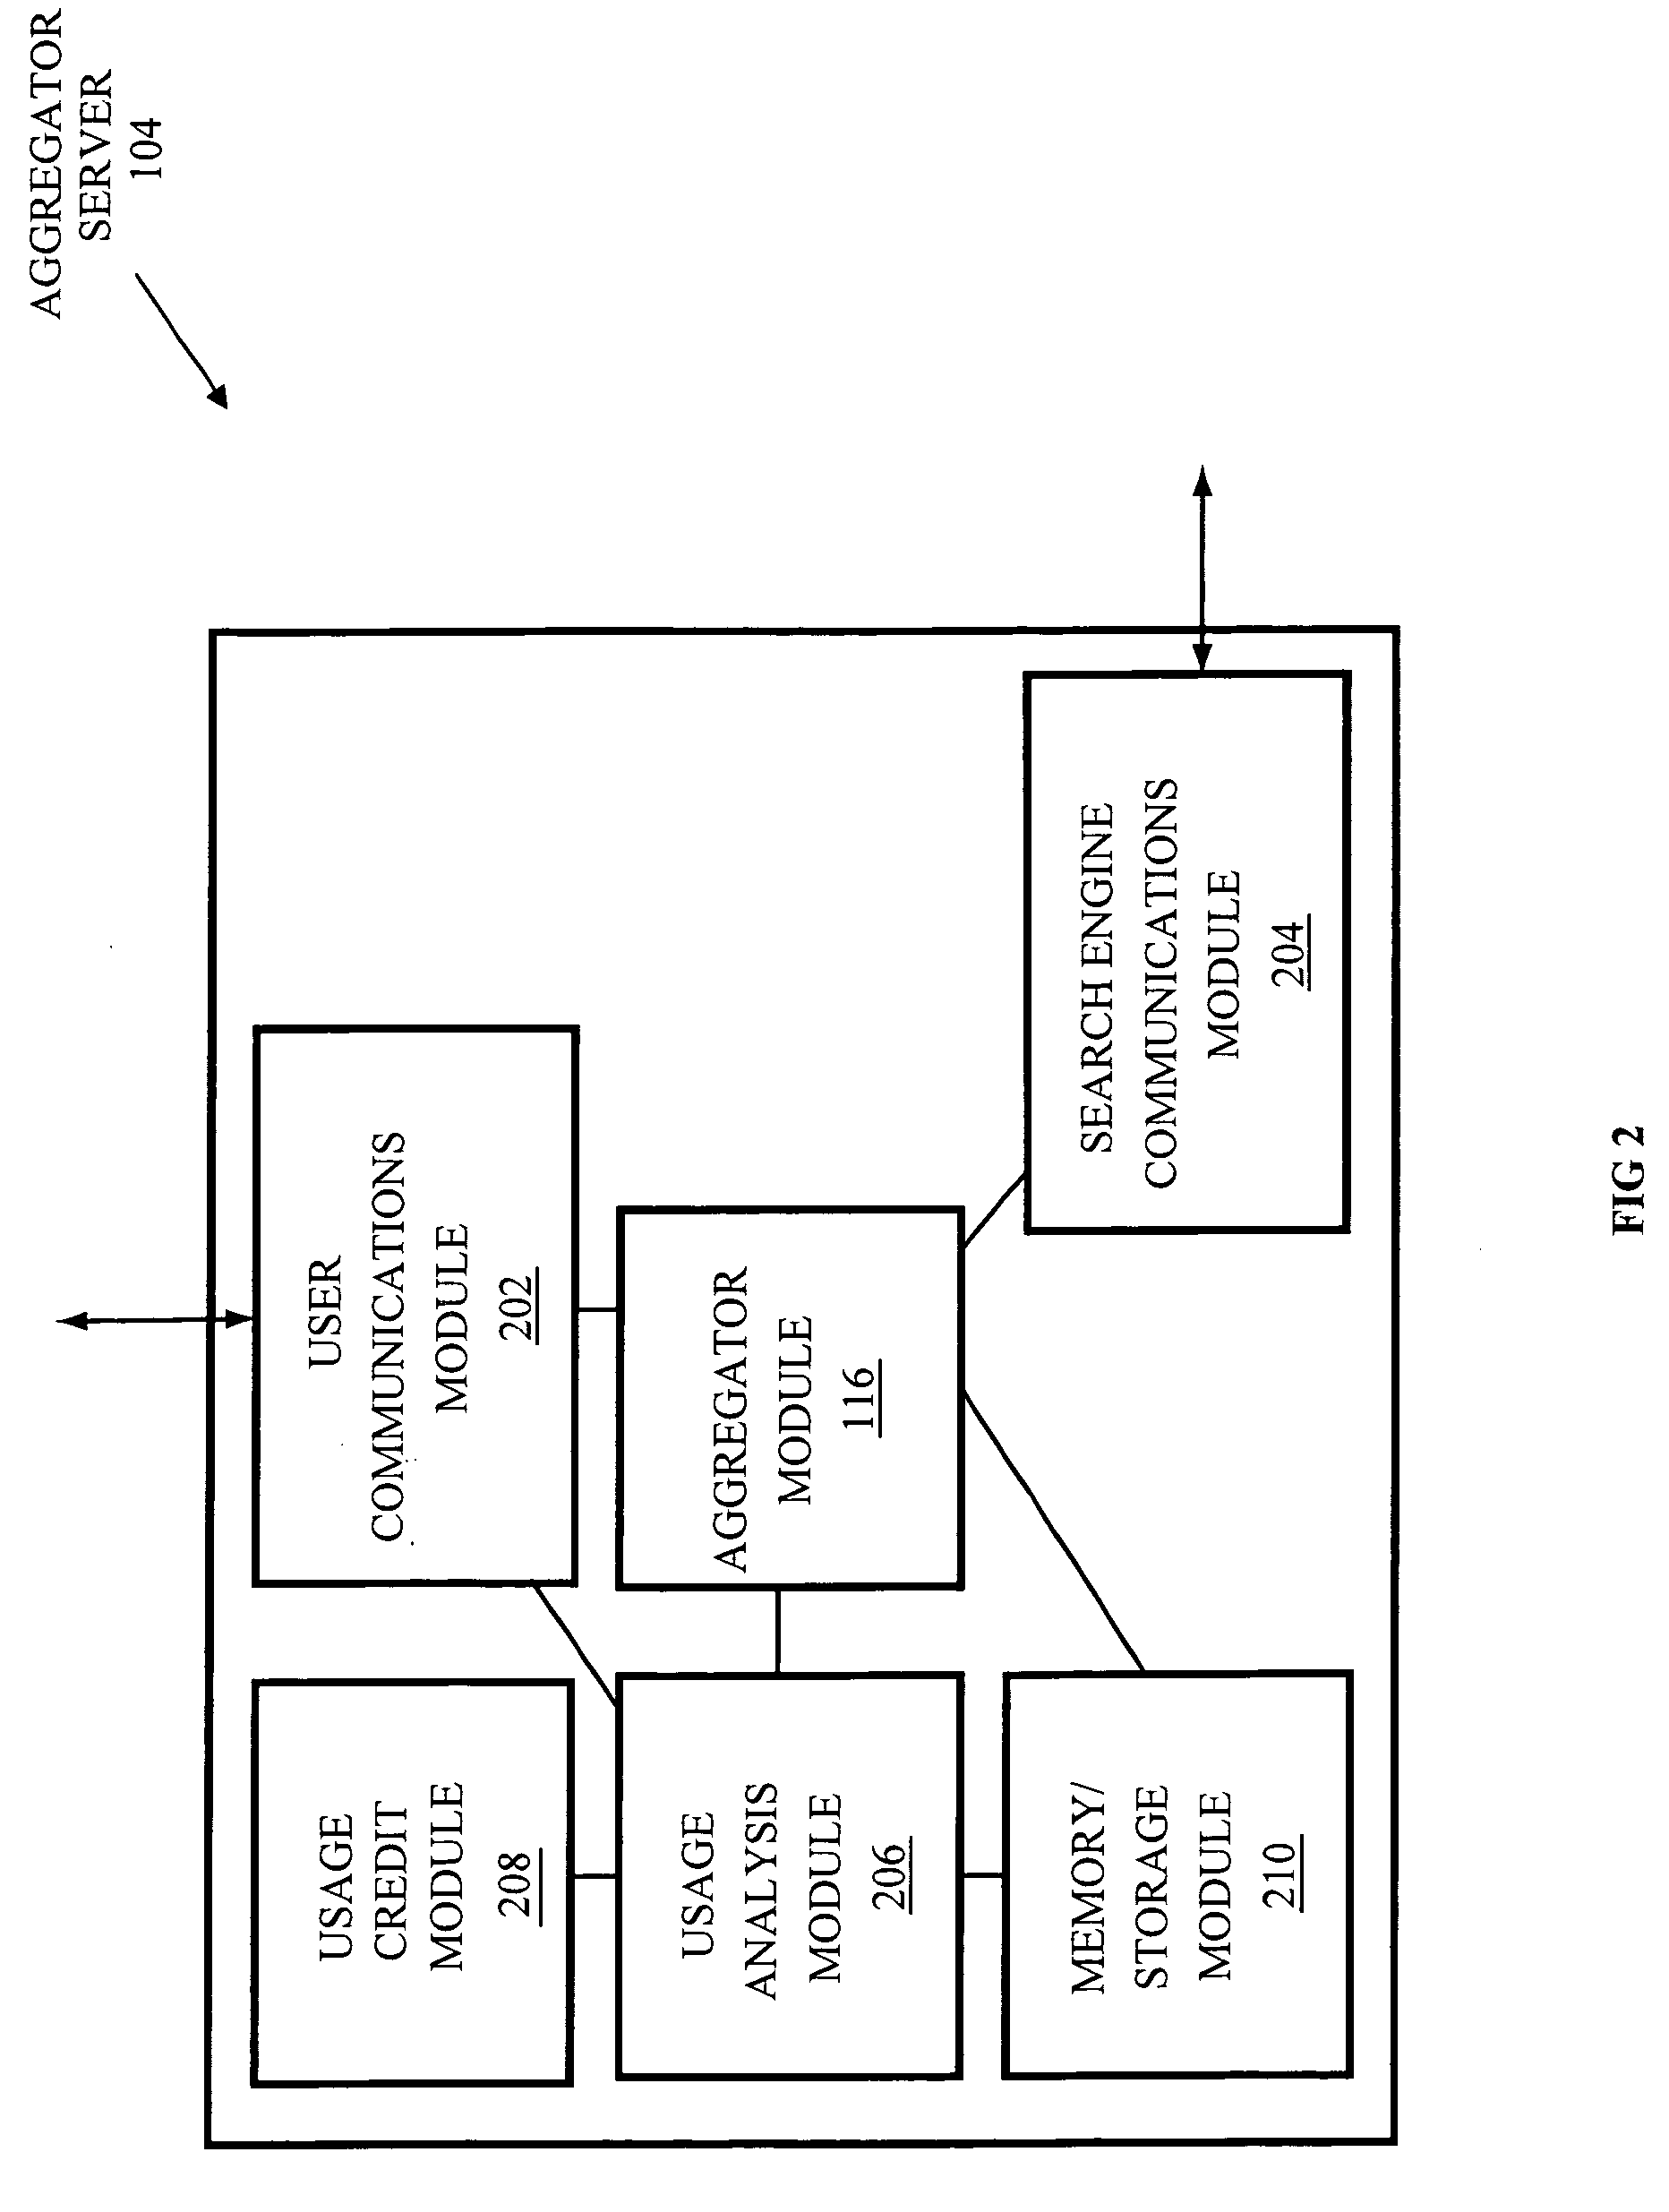 Systems, methods, and media for utilizing electronic document usage information with search engines